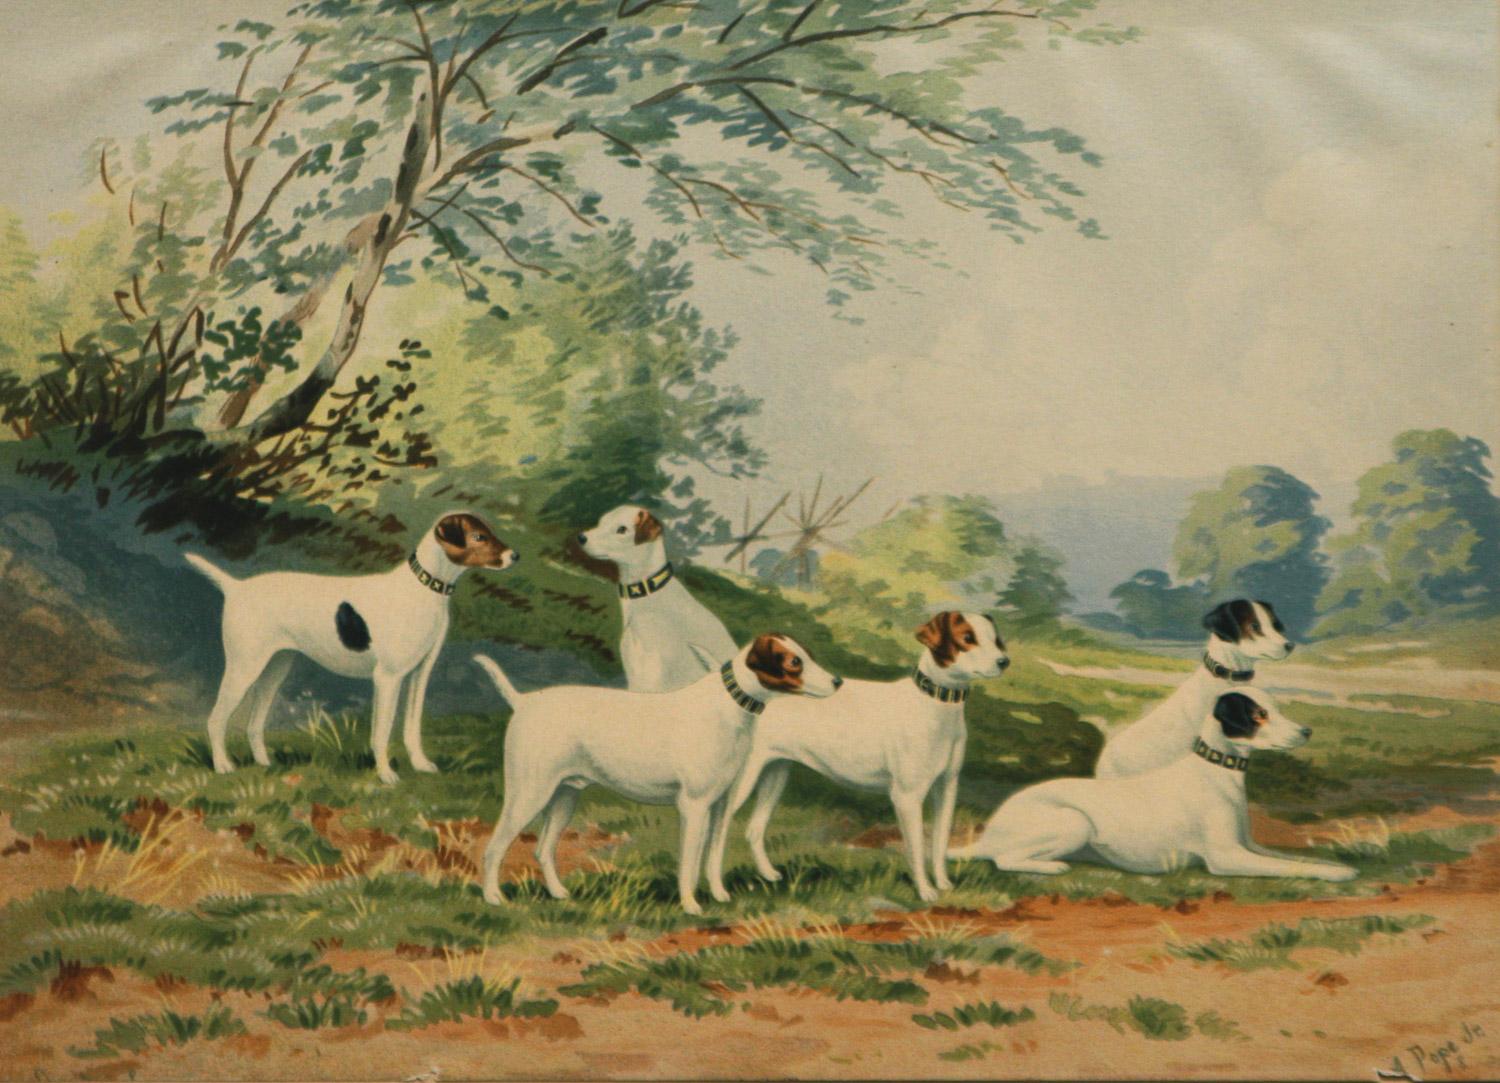 jack russells for sale